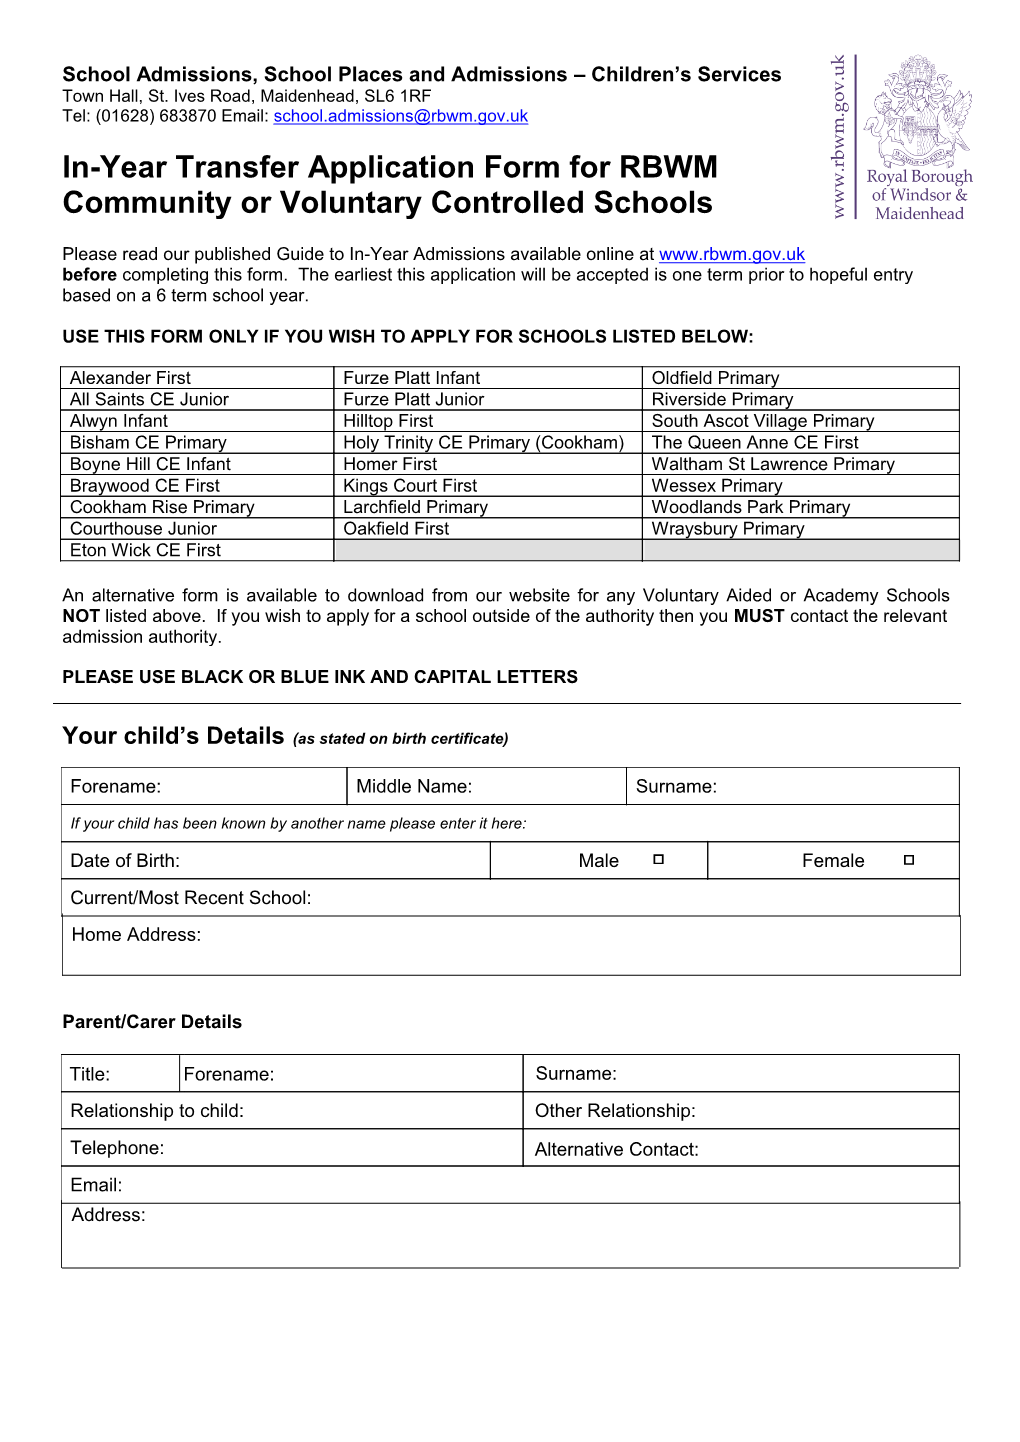 In-Year Transfer Application Form for RBWM Community Or Voluntary Controlled Schools